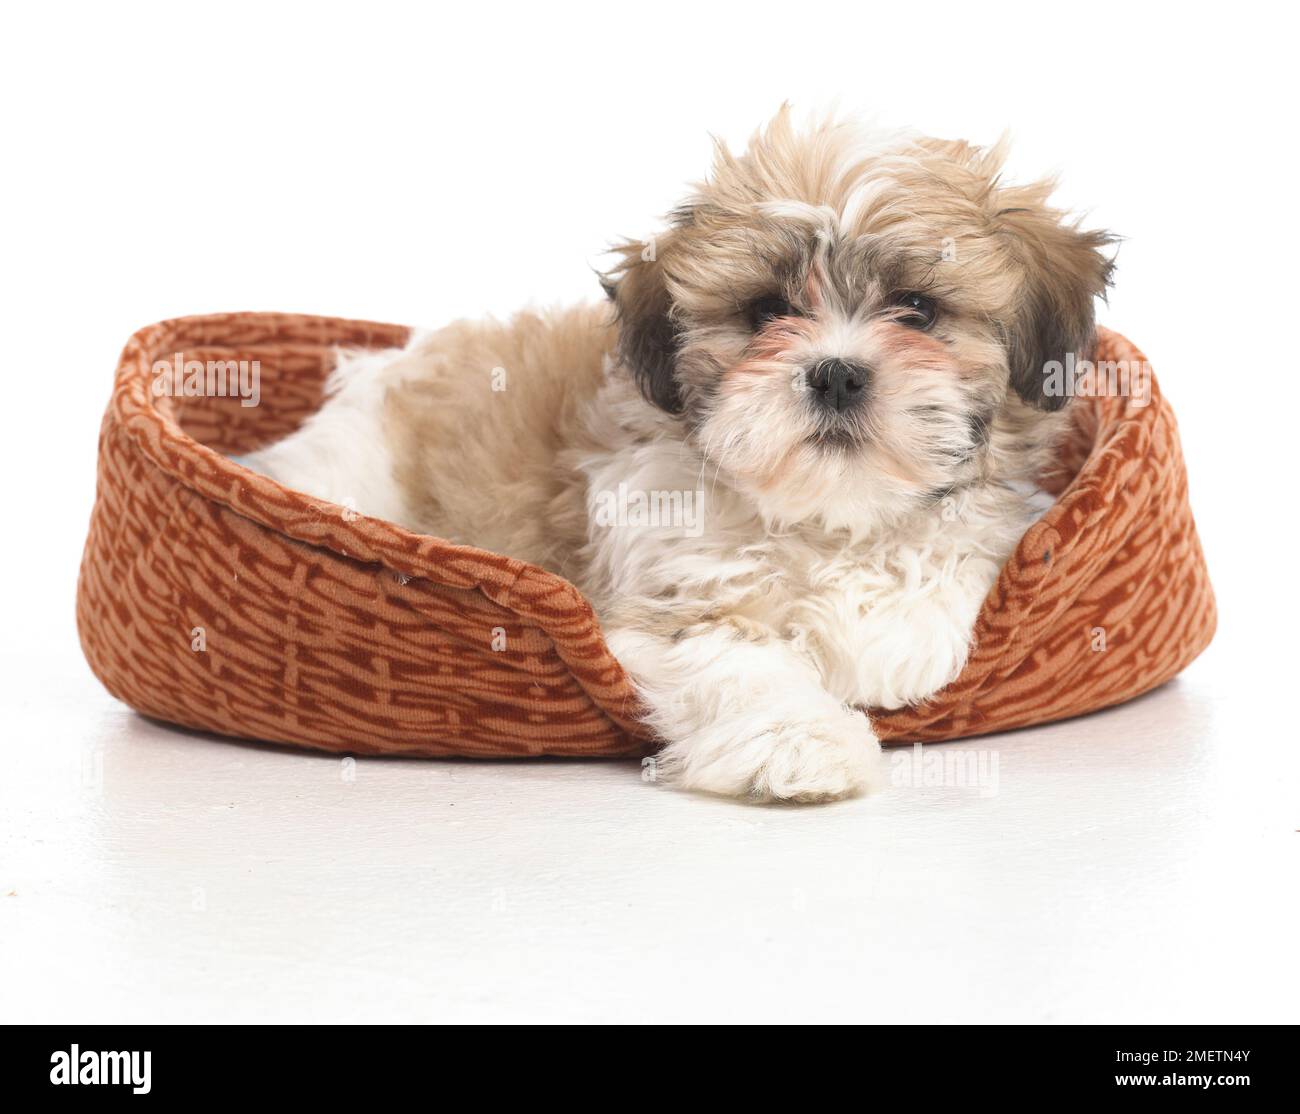 Shih Tzu puppy in dog bed, 8-week-old Stock Photo - Alamy